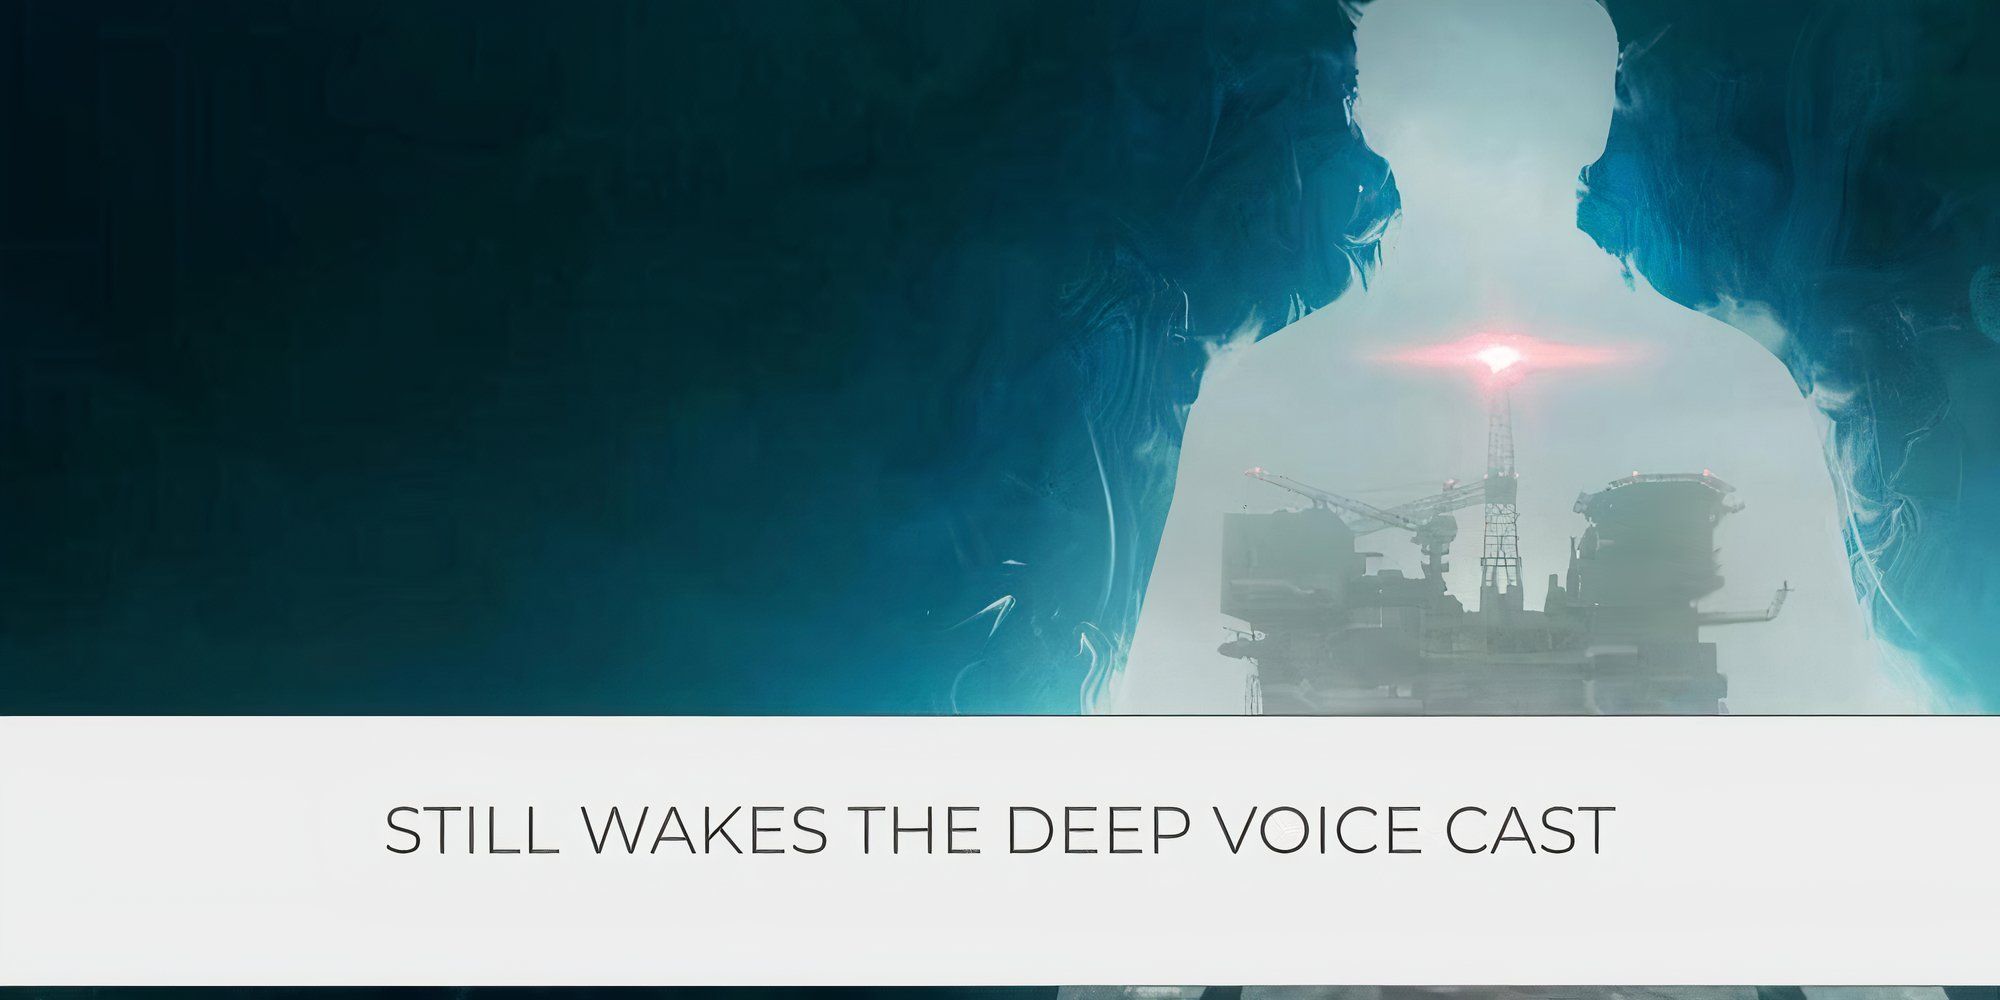 All voice actors of Still Wakes the Deep